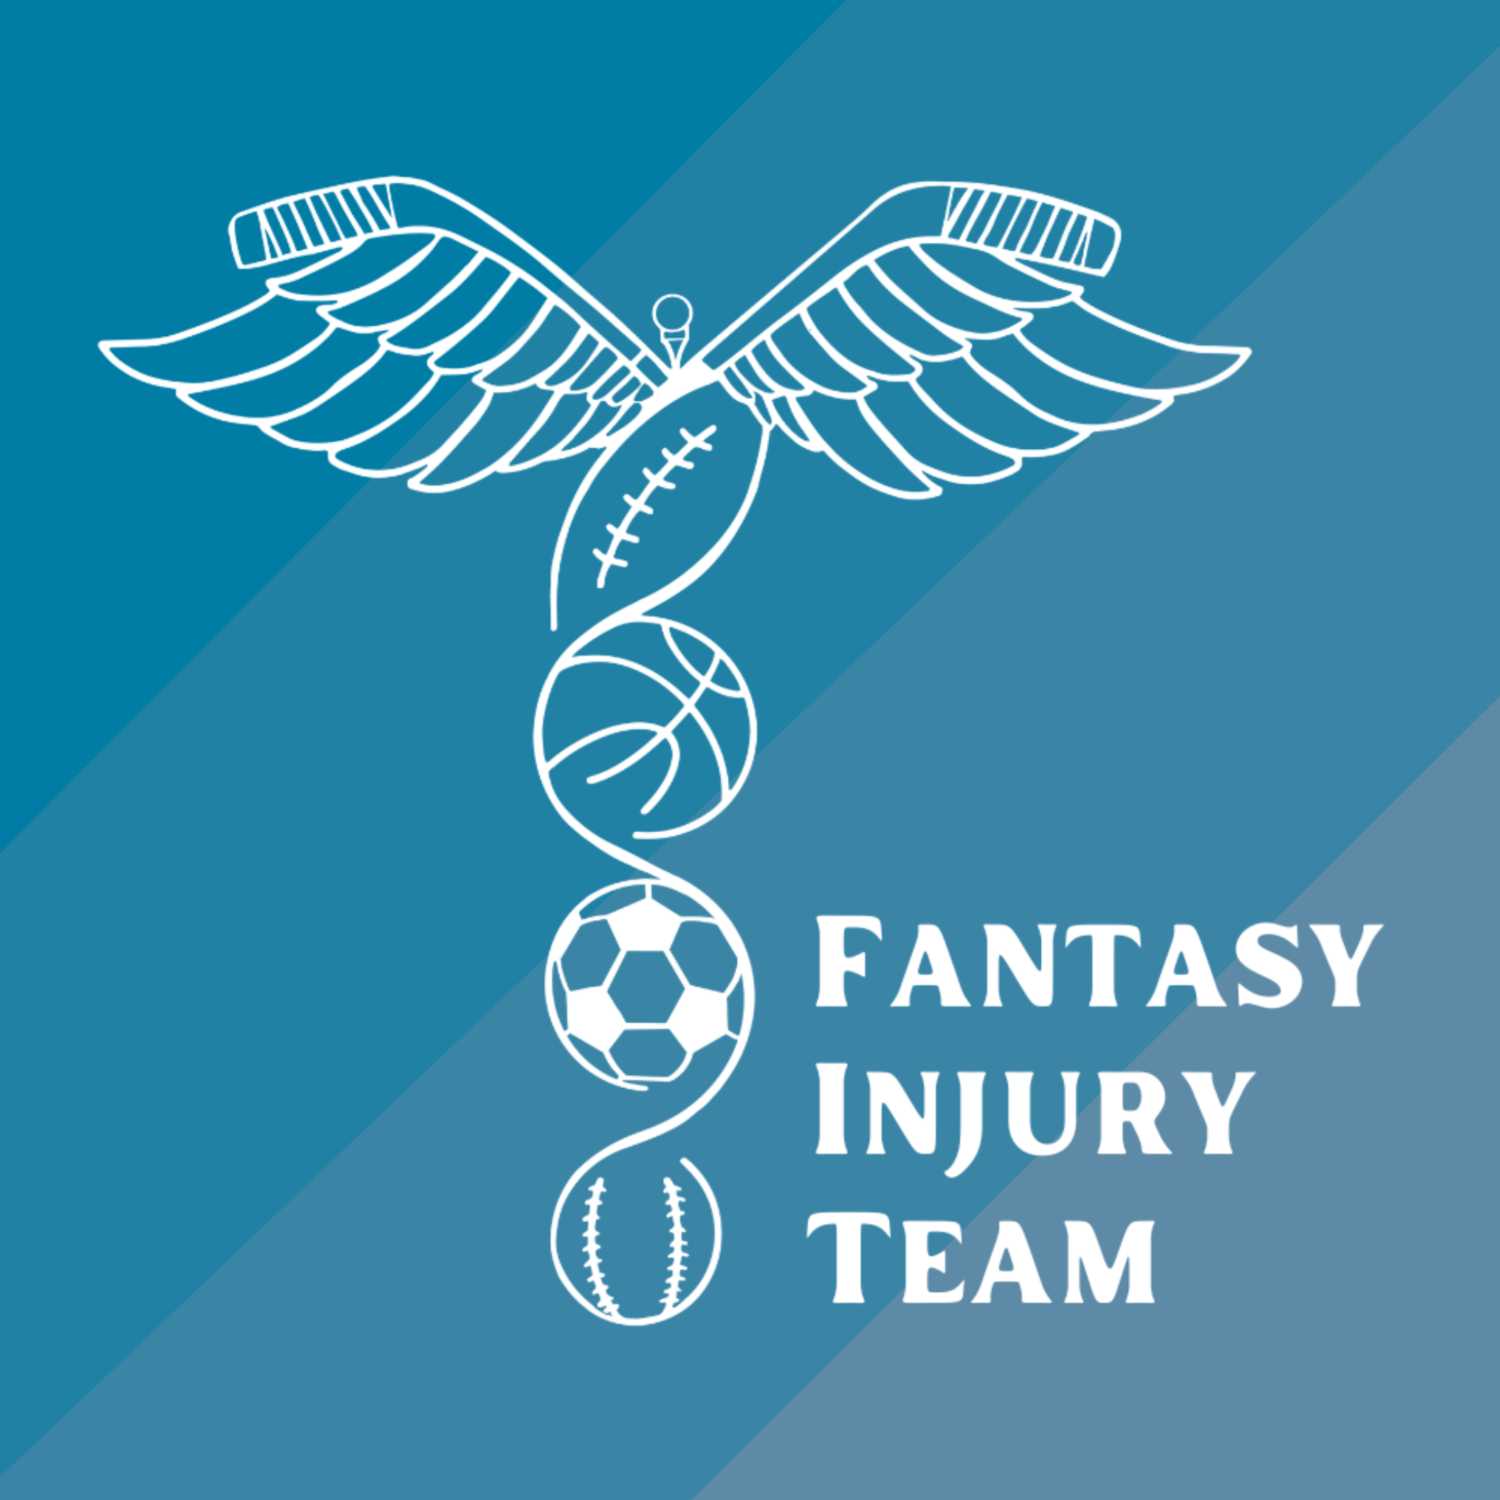 Reviews of Fantasy Football Counselor - Chartable